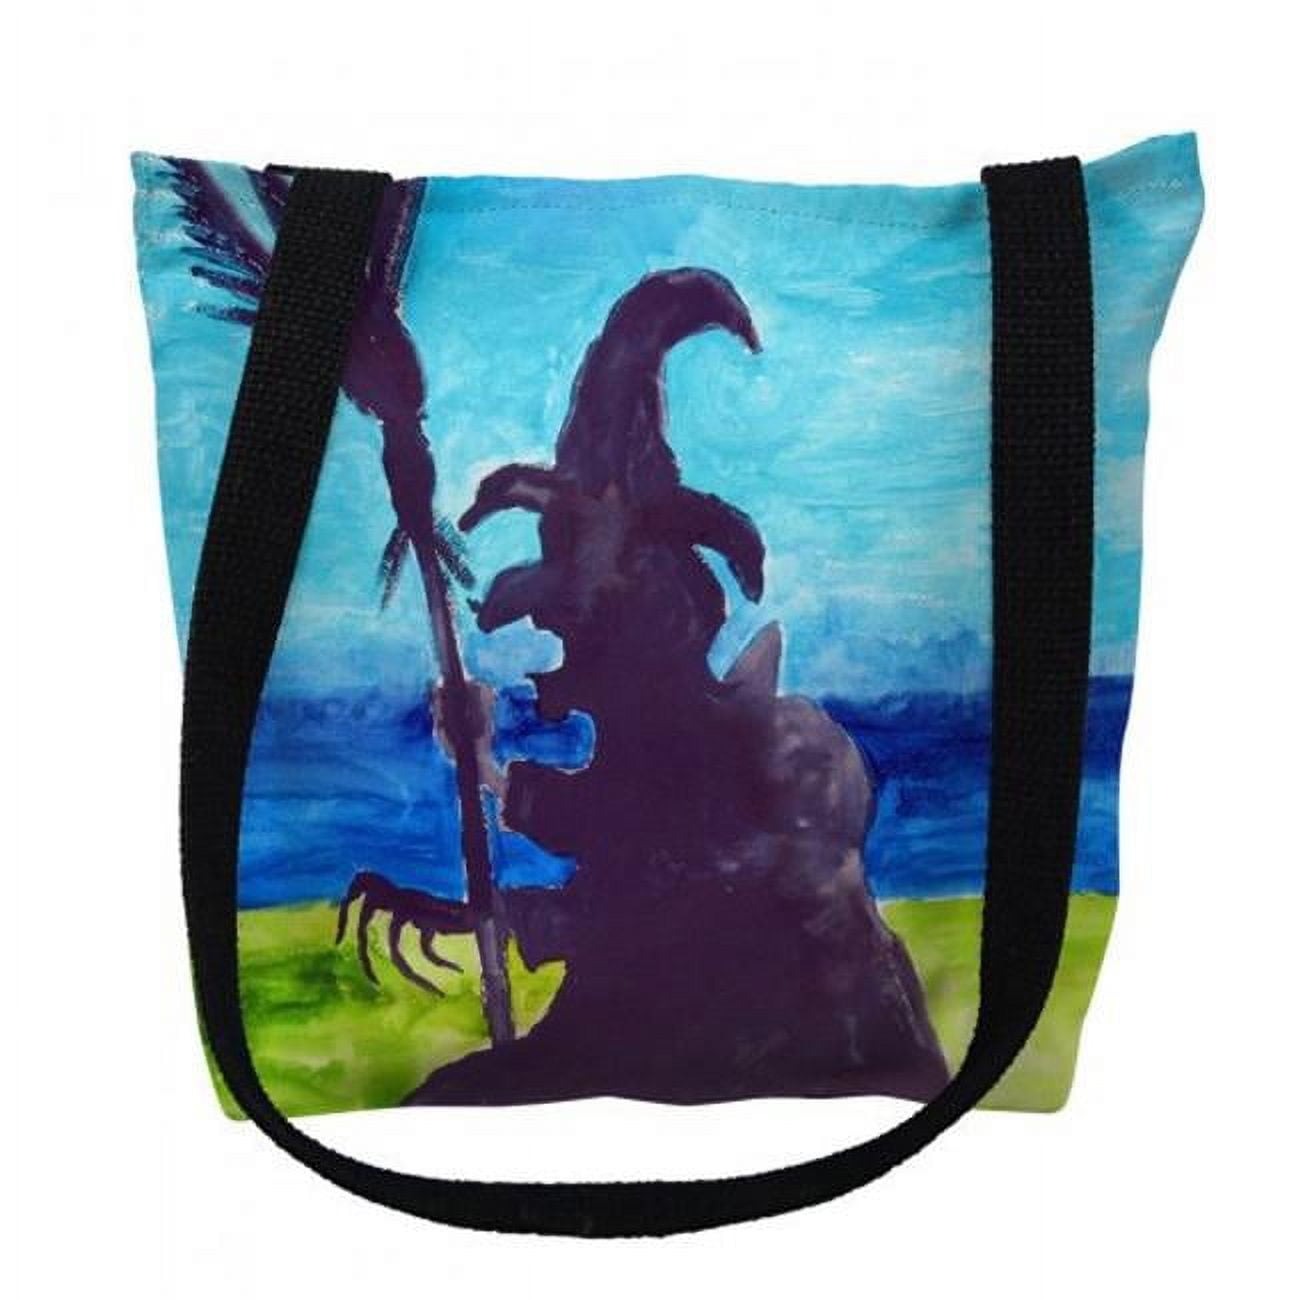 Ty1040m 16 X 16 In. Wicked Witch Tote Bag - Medium